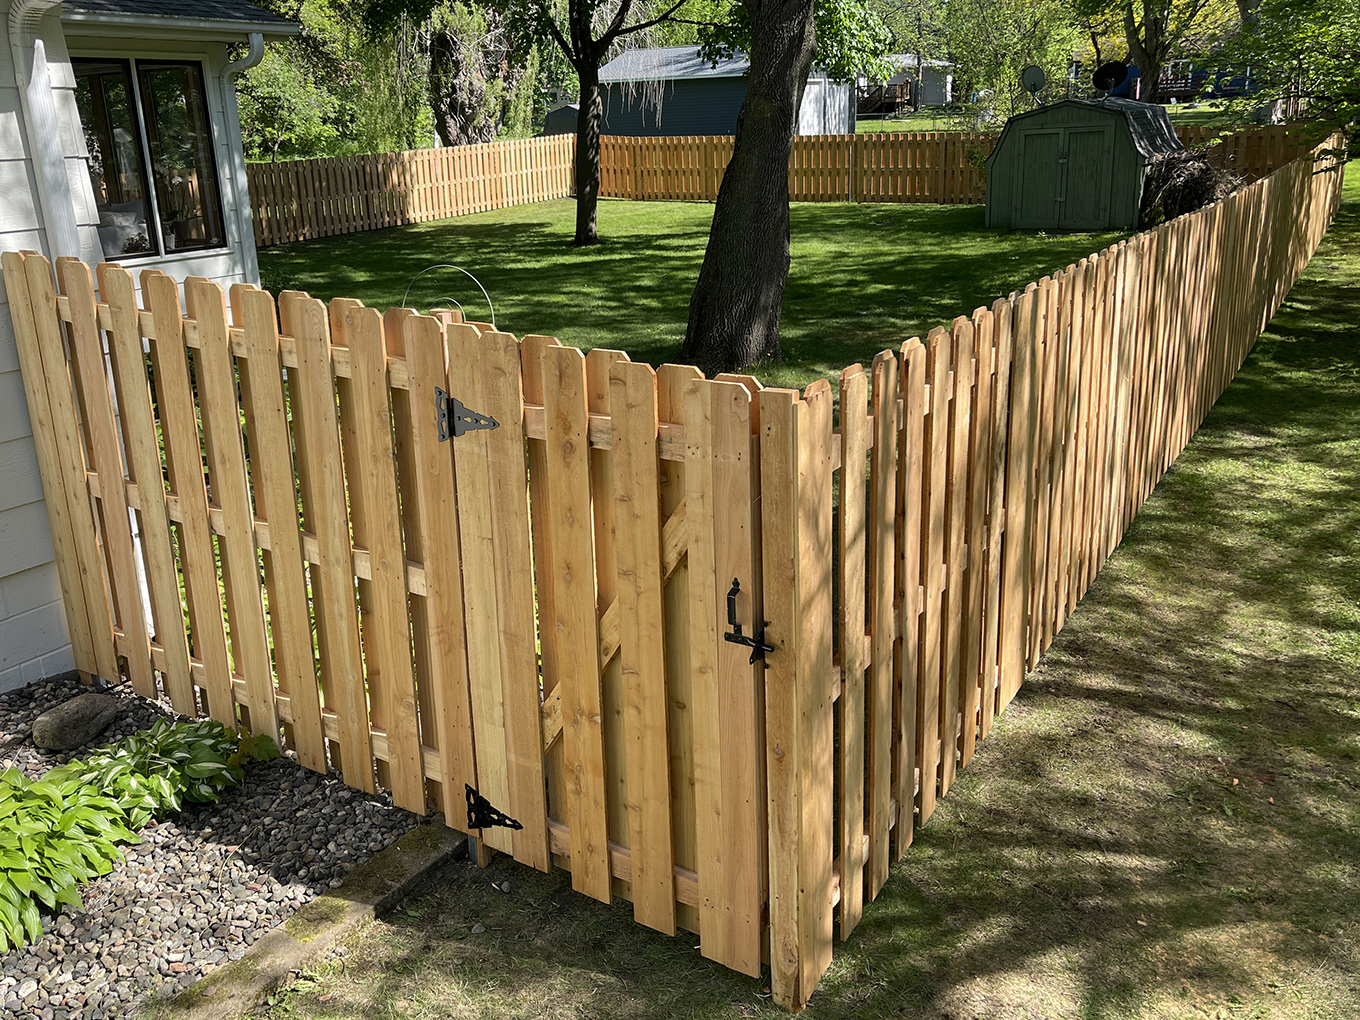 Mayer Minnesota residential and commercial fencing